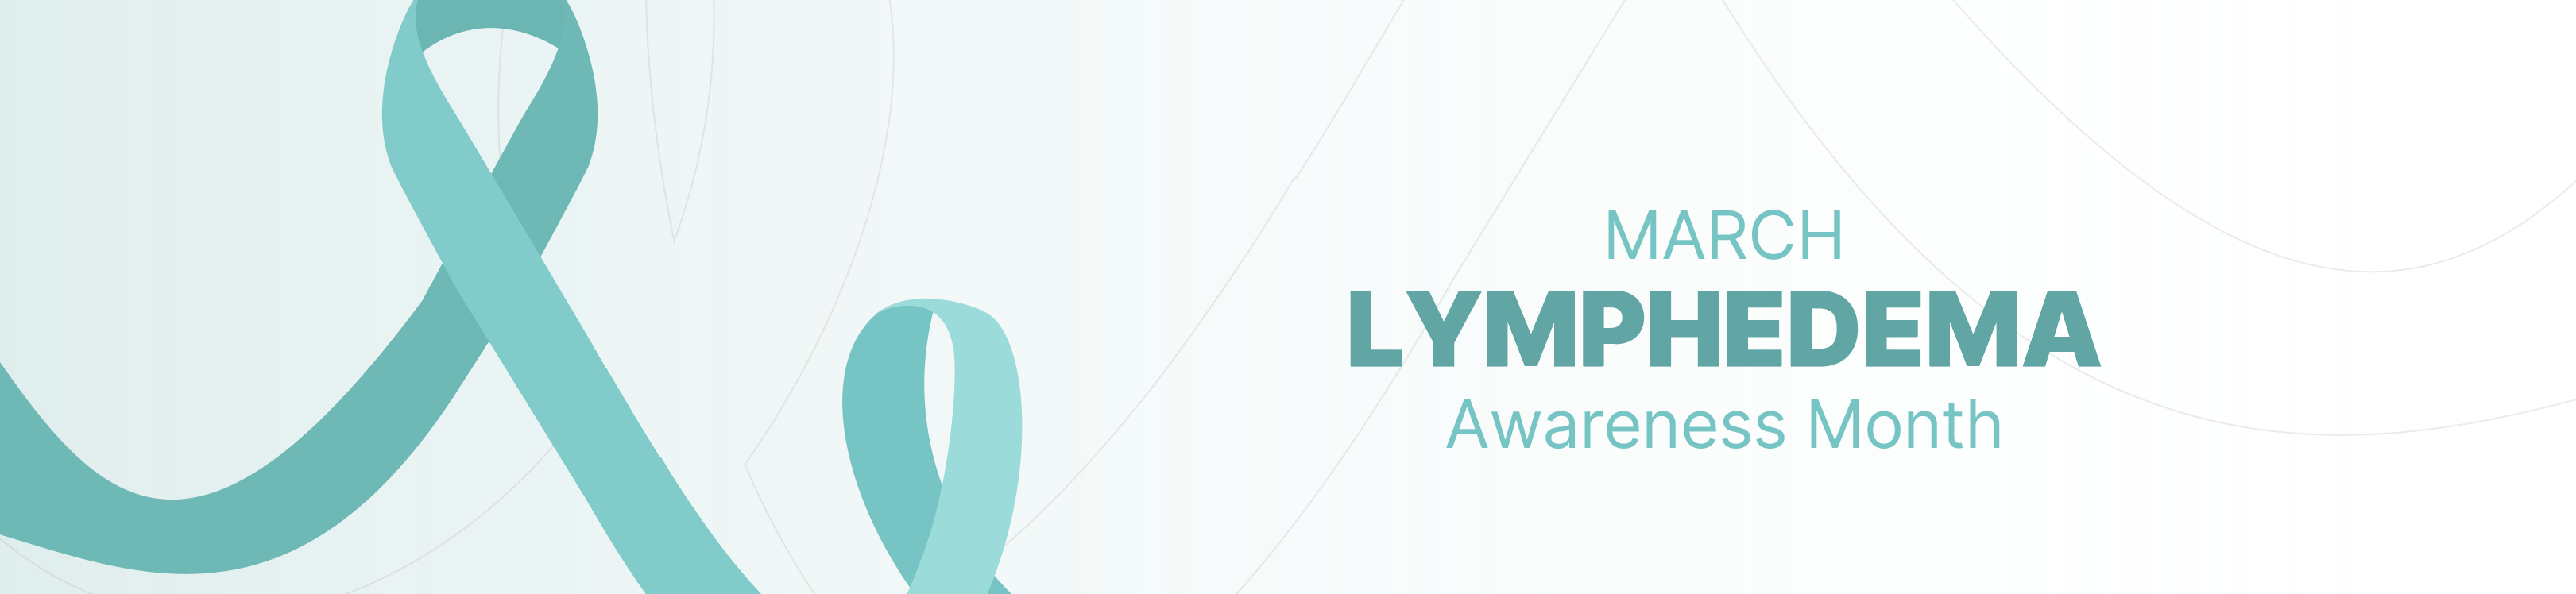 March is Lymphedema Awareness Month